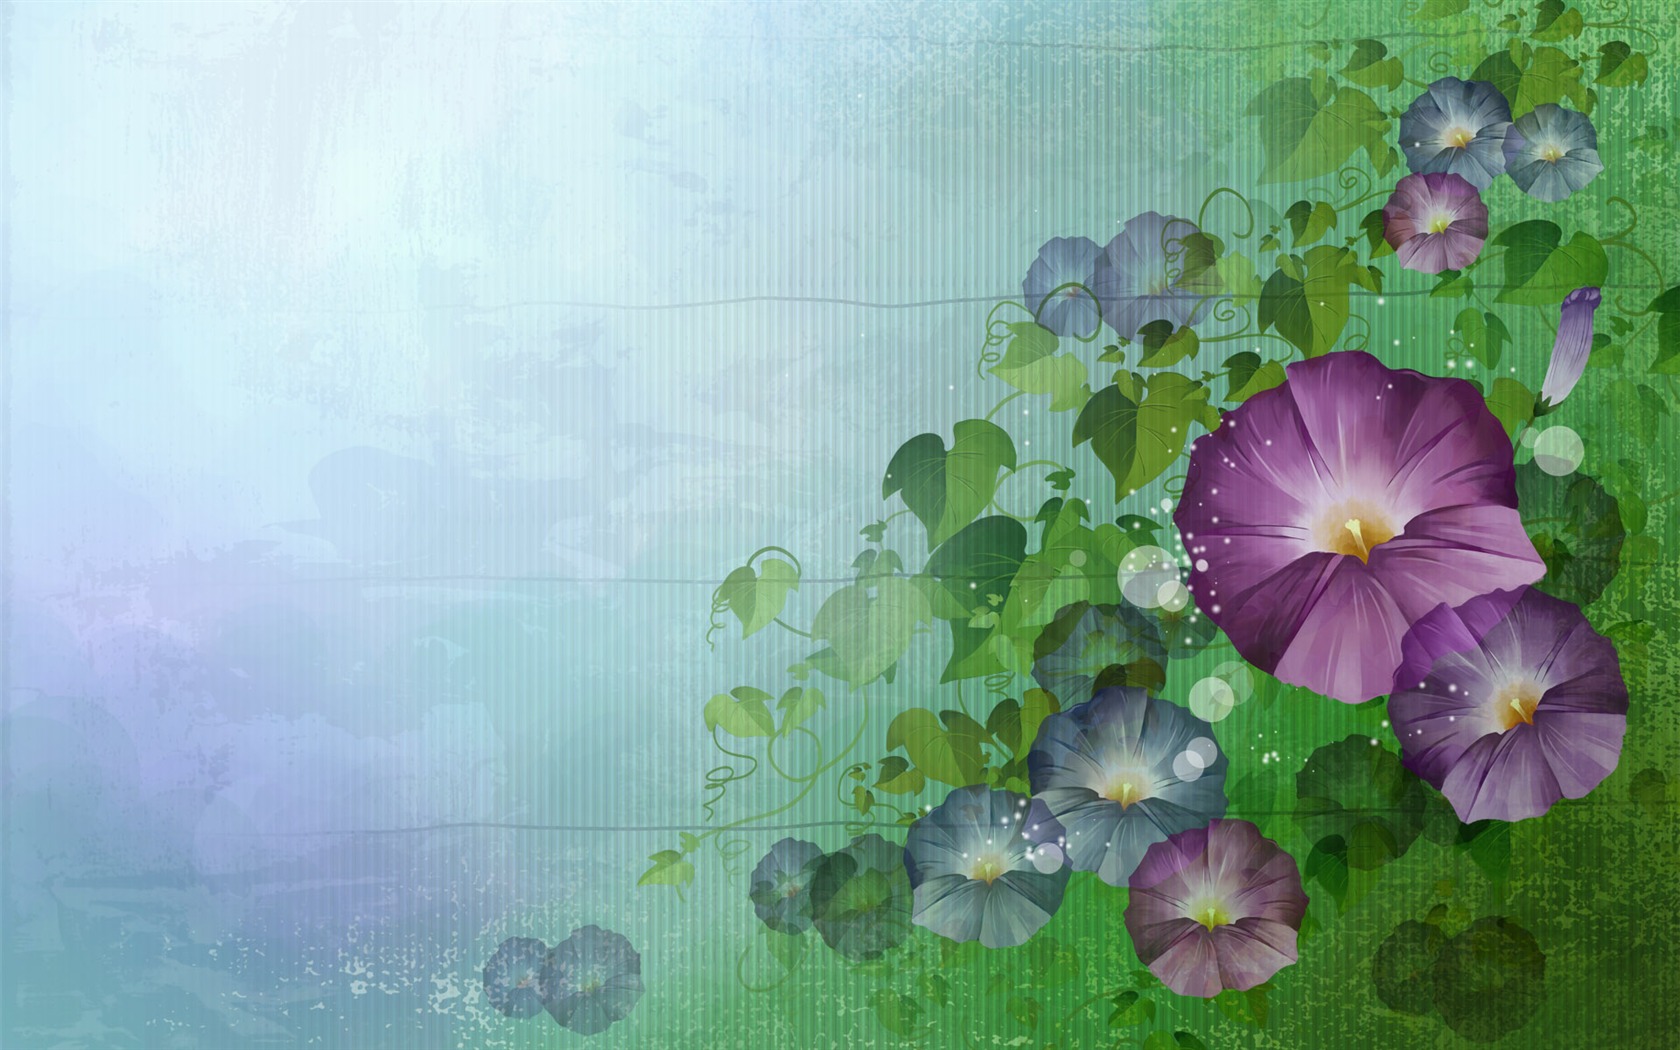 Synthetic Wallpaper Colorful Flower #21 - 1680x1050